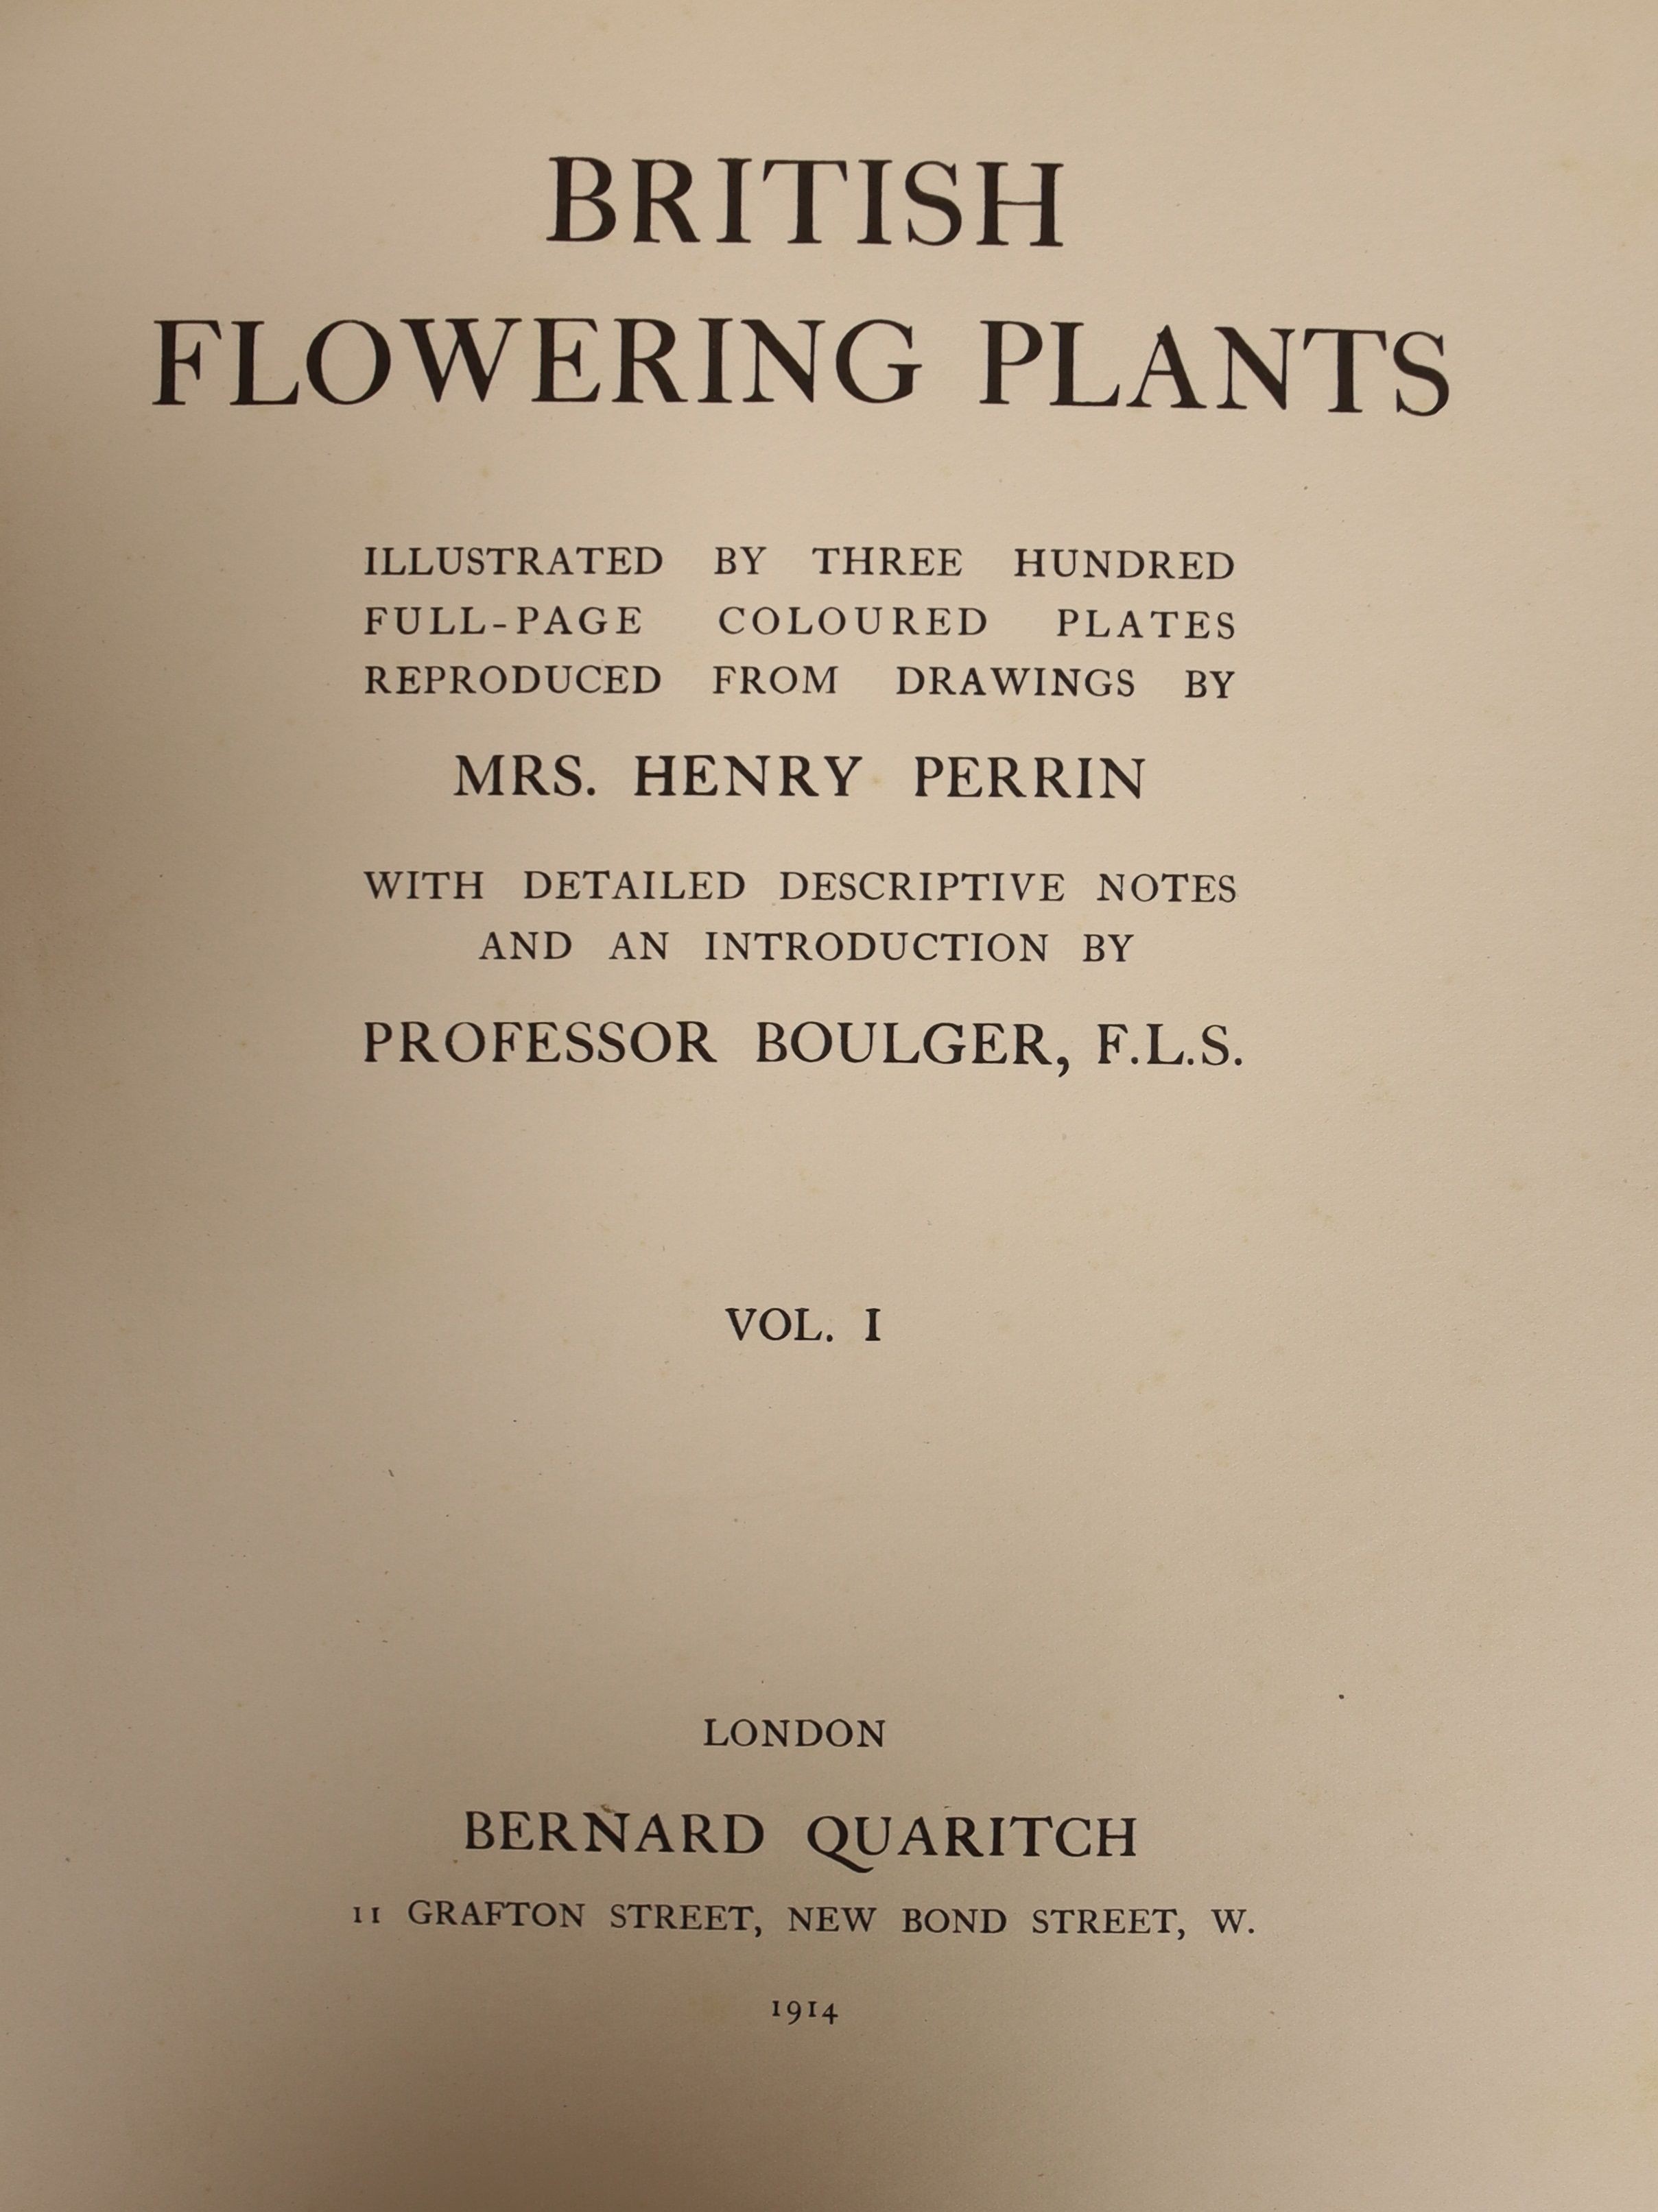 Boulger, George S. - British Flowering Plants, illustrated by Ida Southwell Perrin, one of 1000, 4 vols, qto, ivory white buckram, with 300 coloured plates, Bernard Quaritch, London, 1914